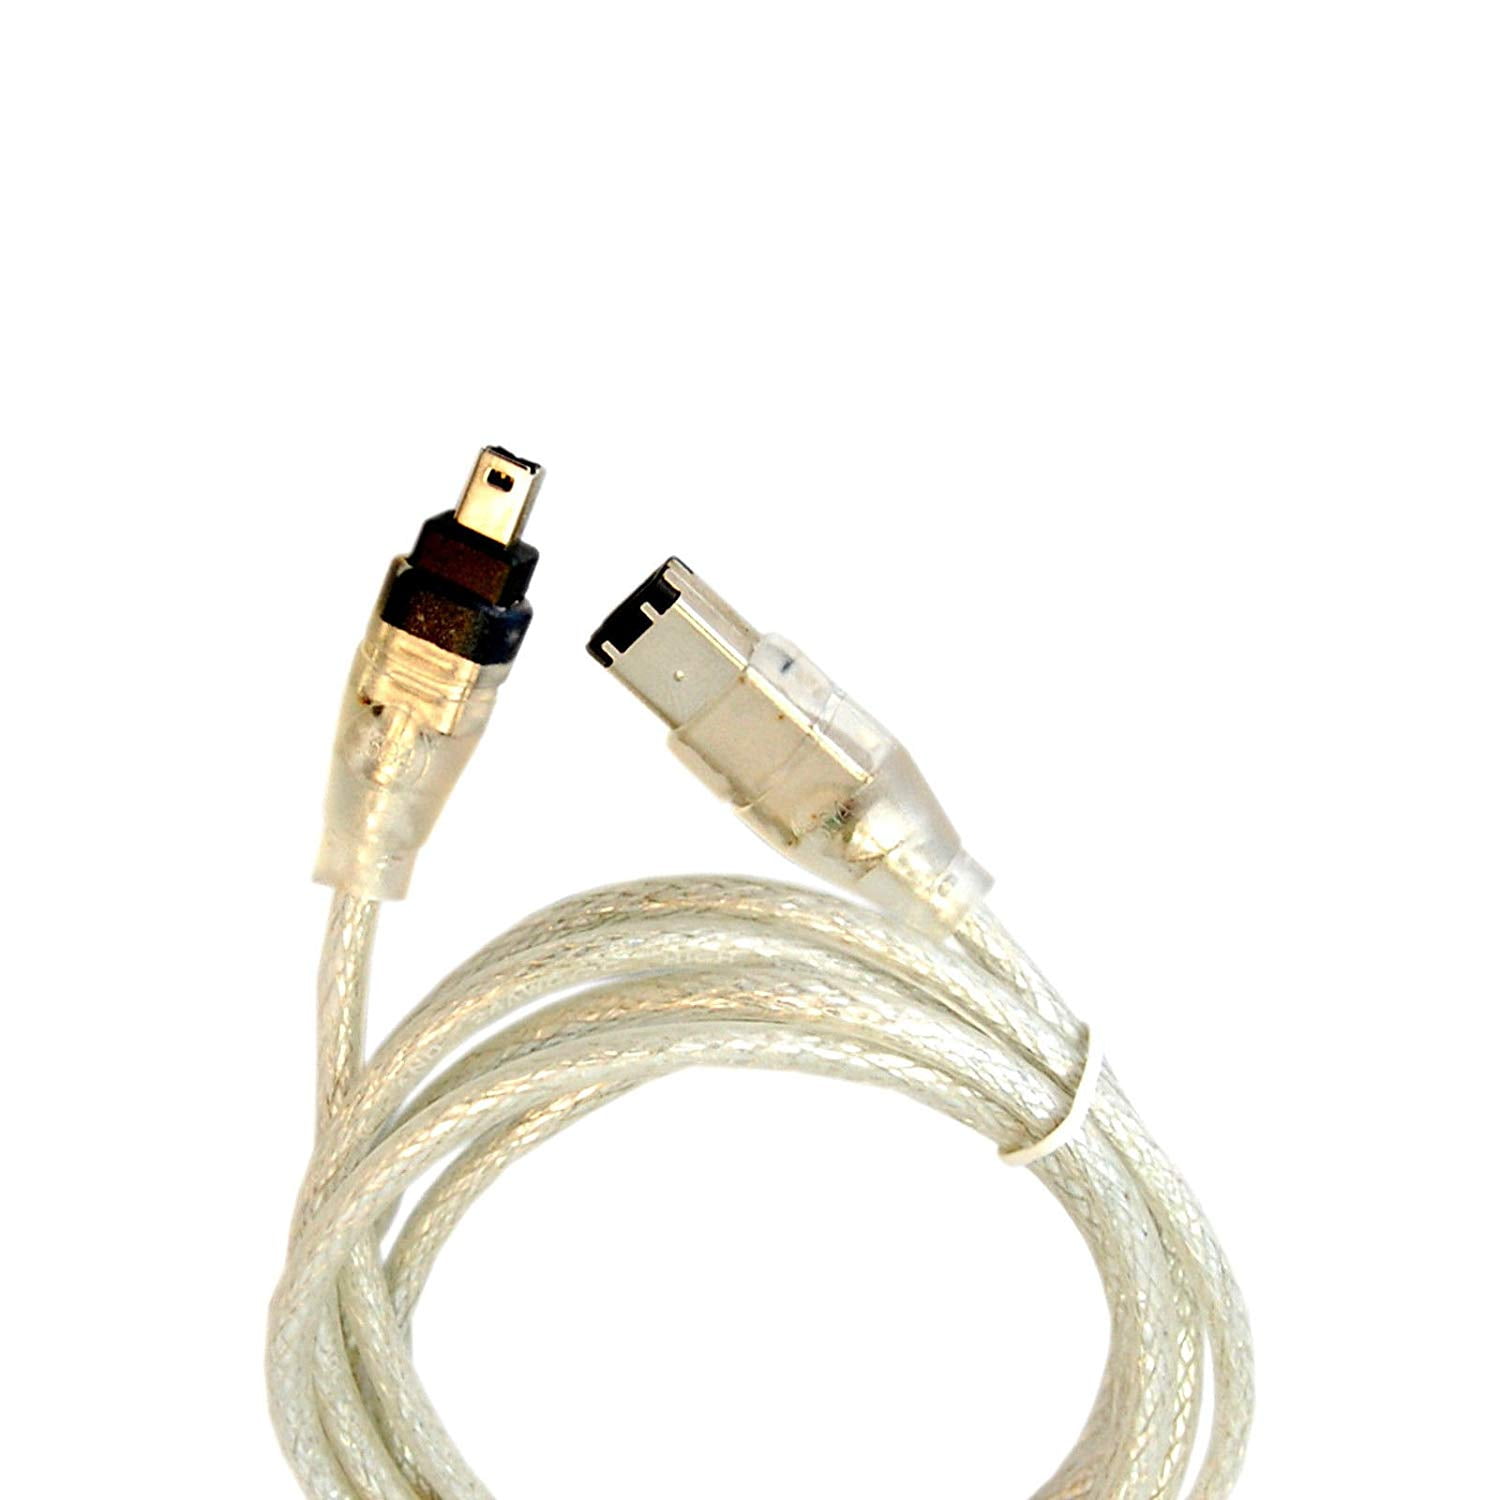 HQRP FireWire Cable Cord for JVC VC-VDV206U IEEE 1394 4pin to 6pin 